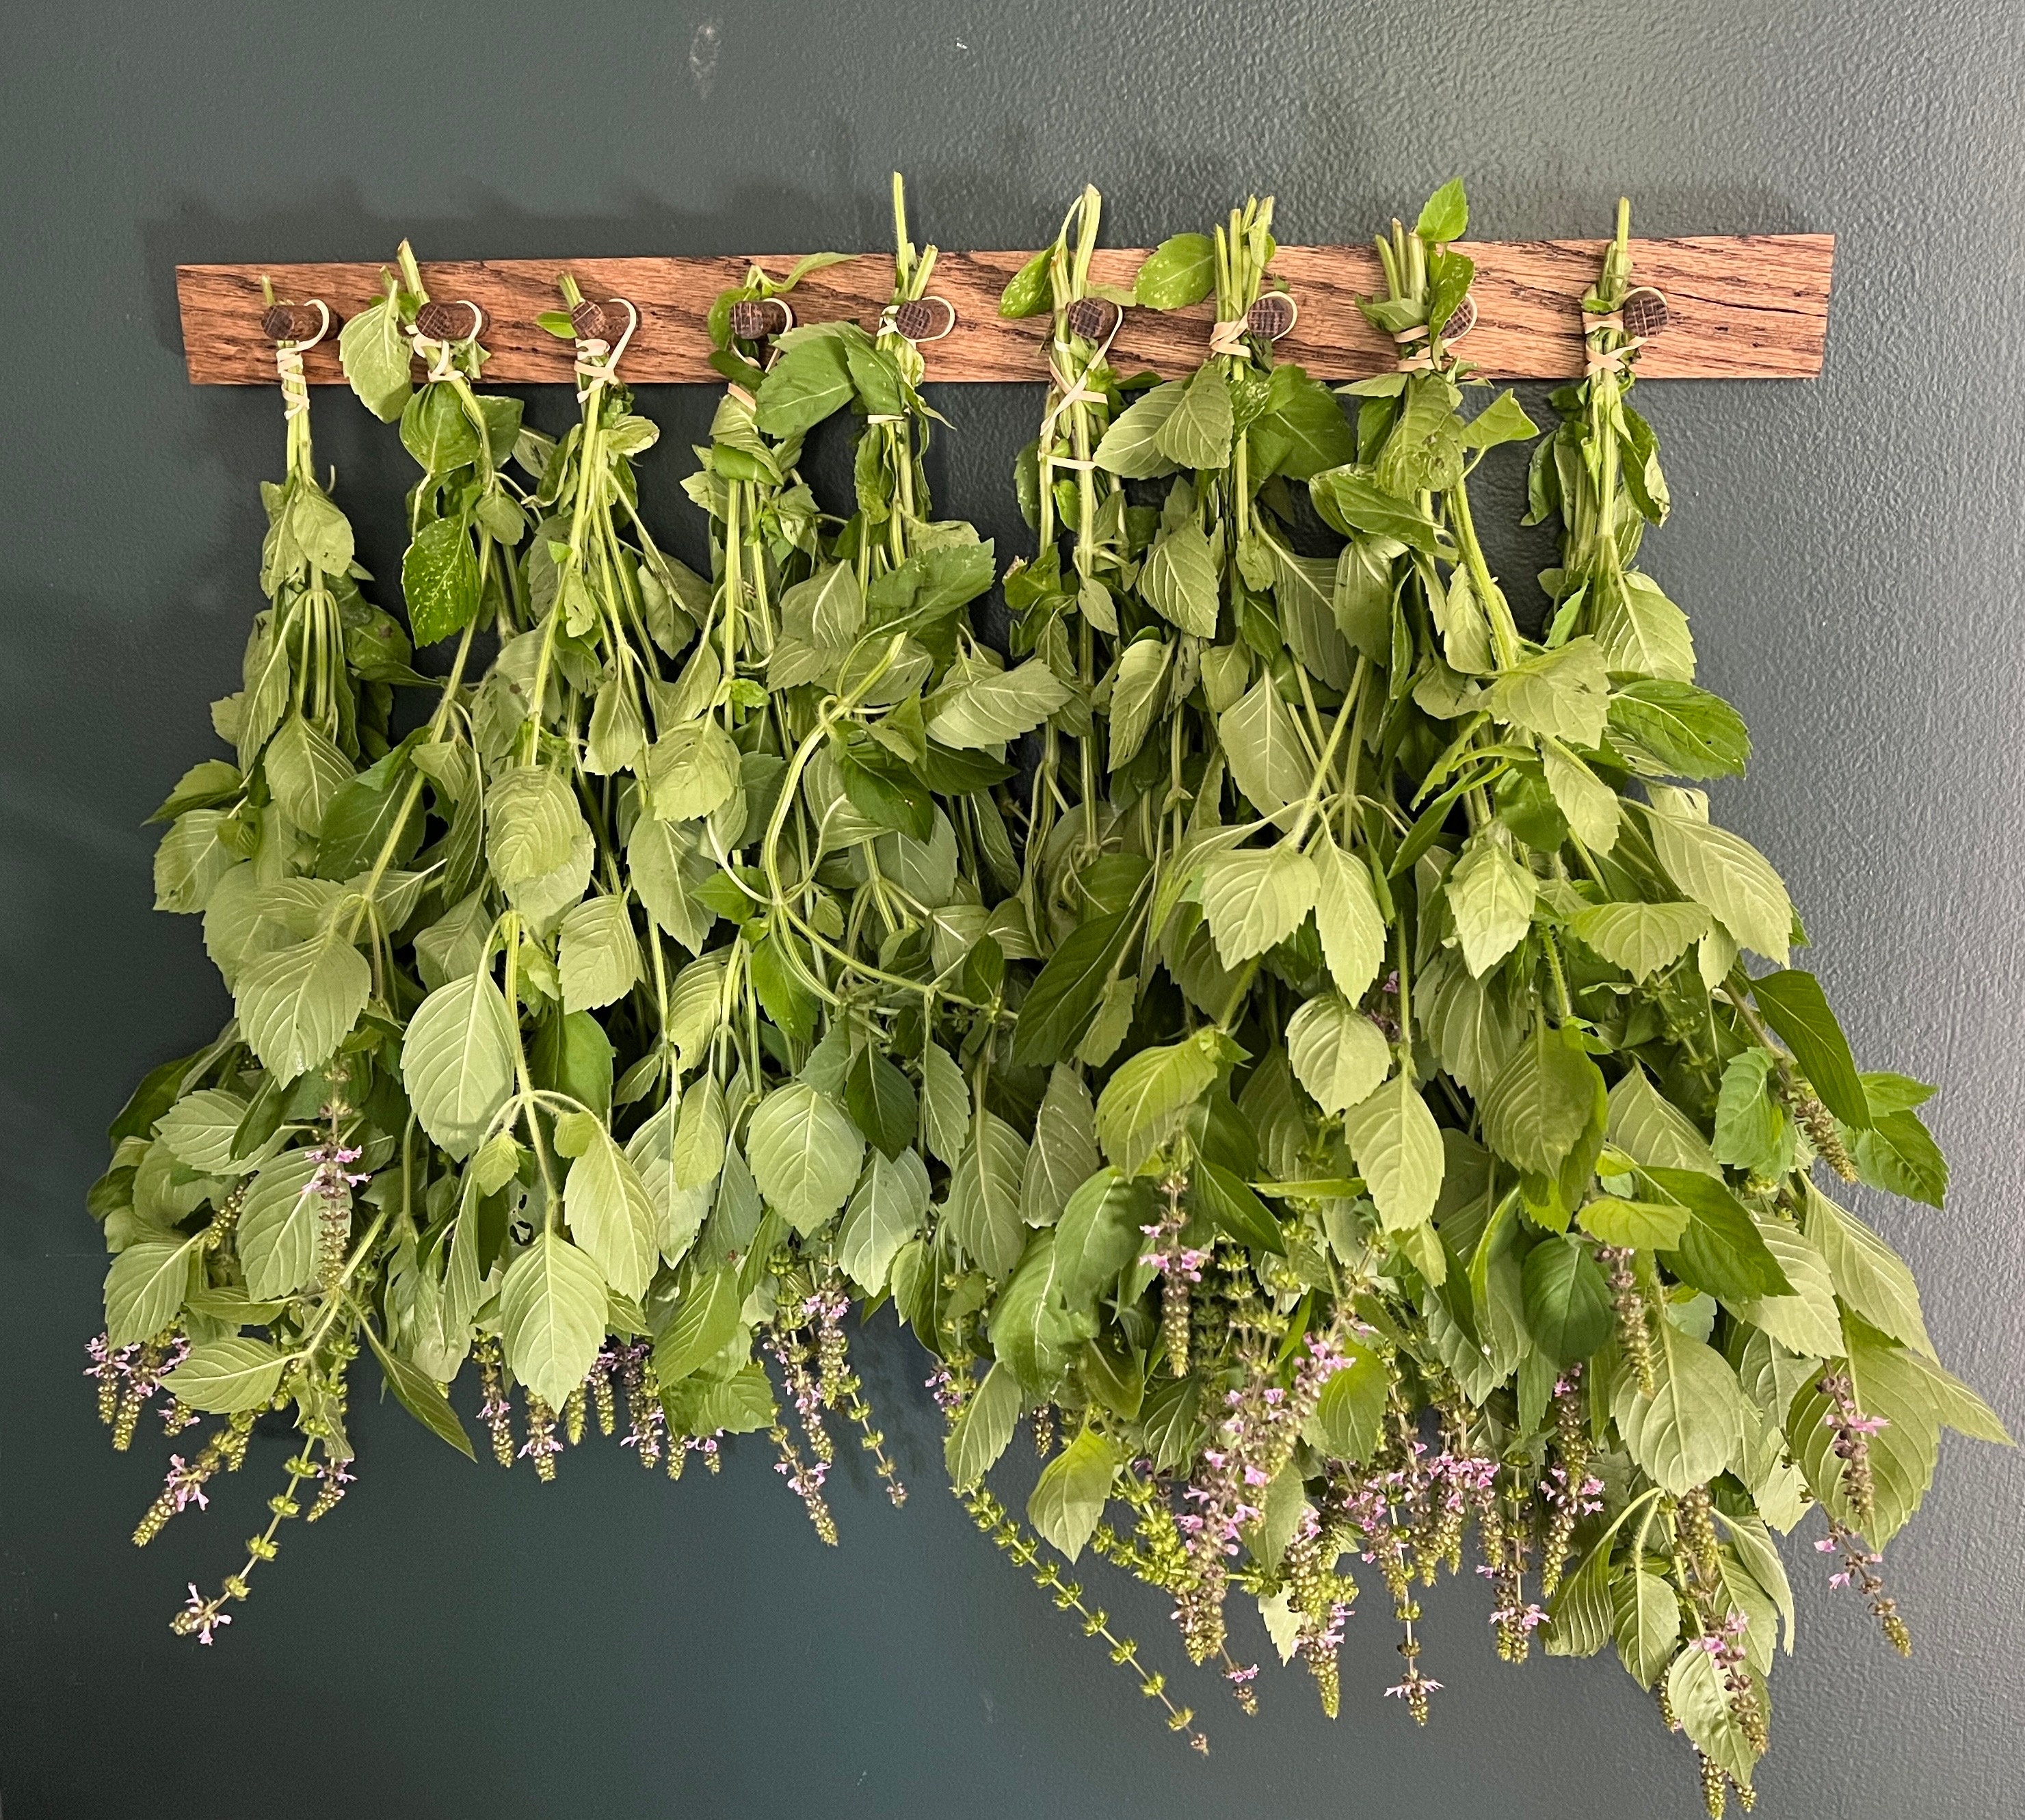 Herb drying rack utilizing an old sign and office binder clips